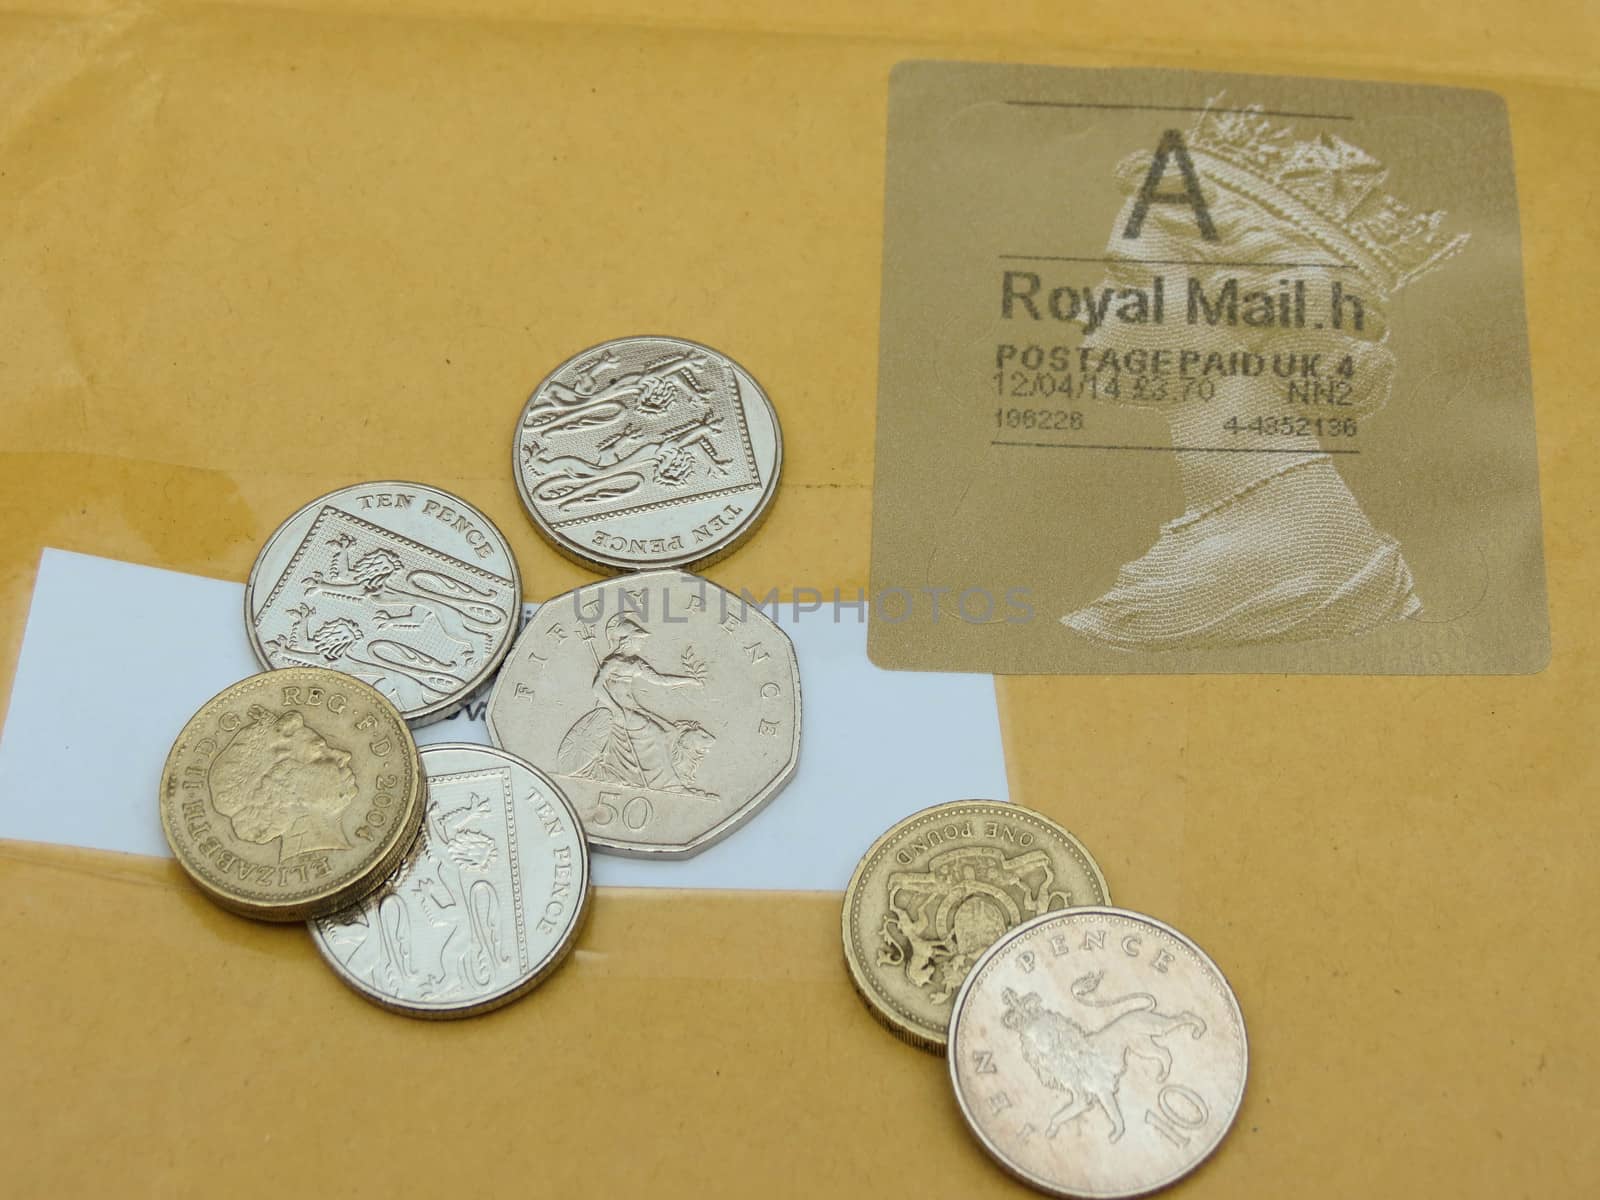 LONDON, CIRCA APRIL 2014: British Pounds coins (currency of United Kingdom) over a mail envelope with British stamp, useful a trip to the UK concept